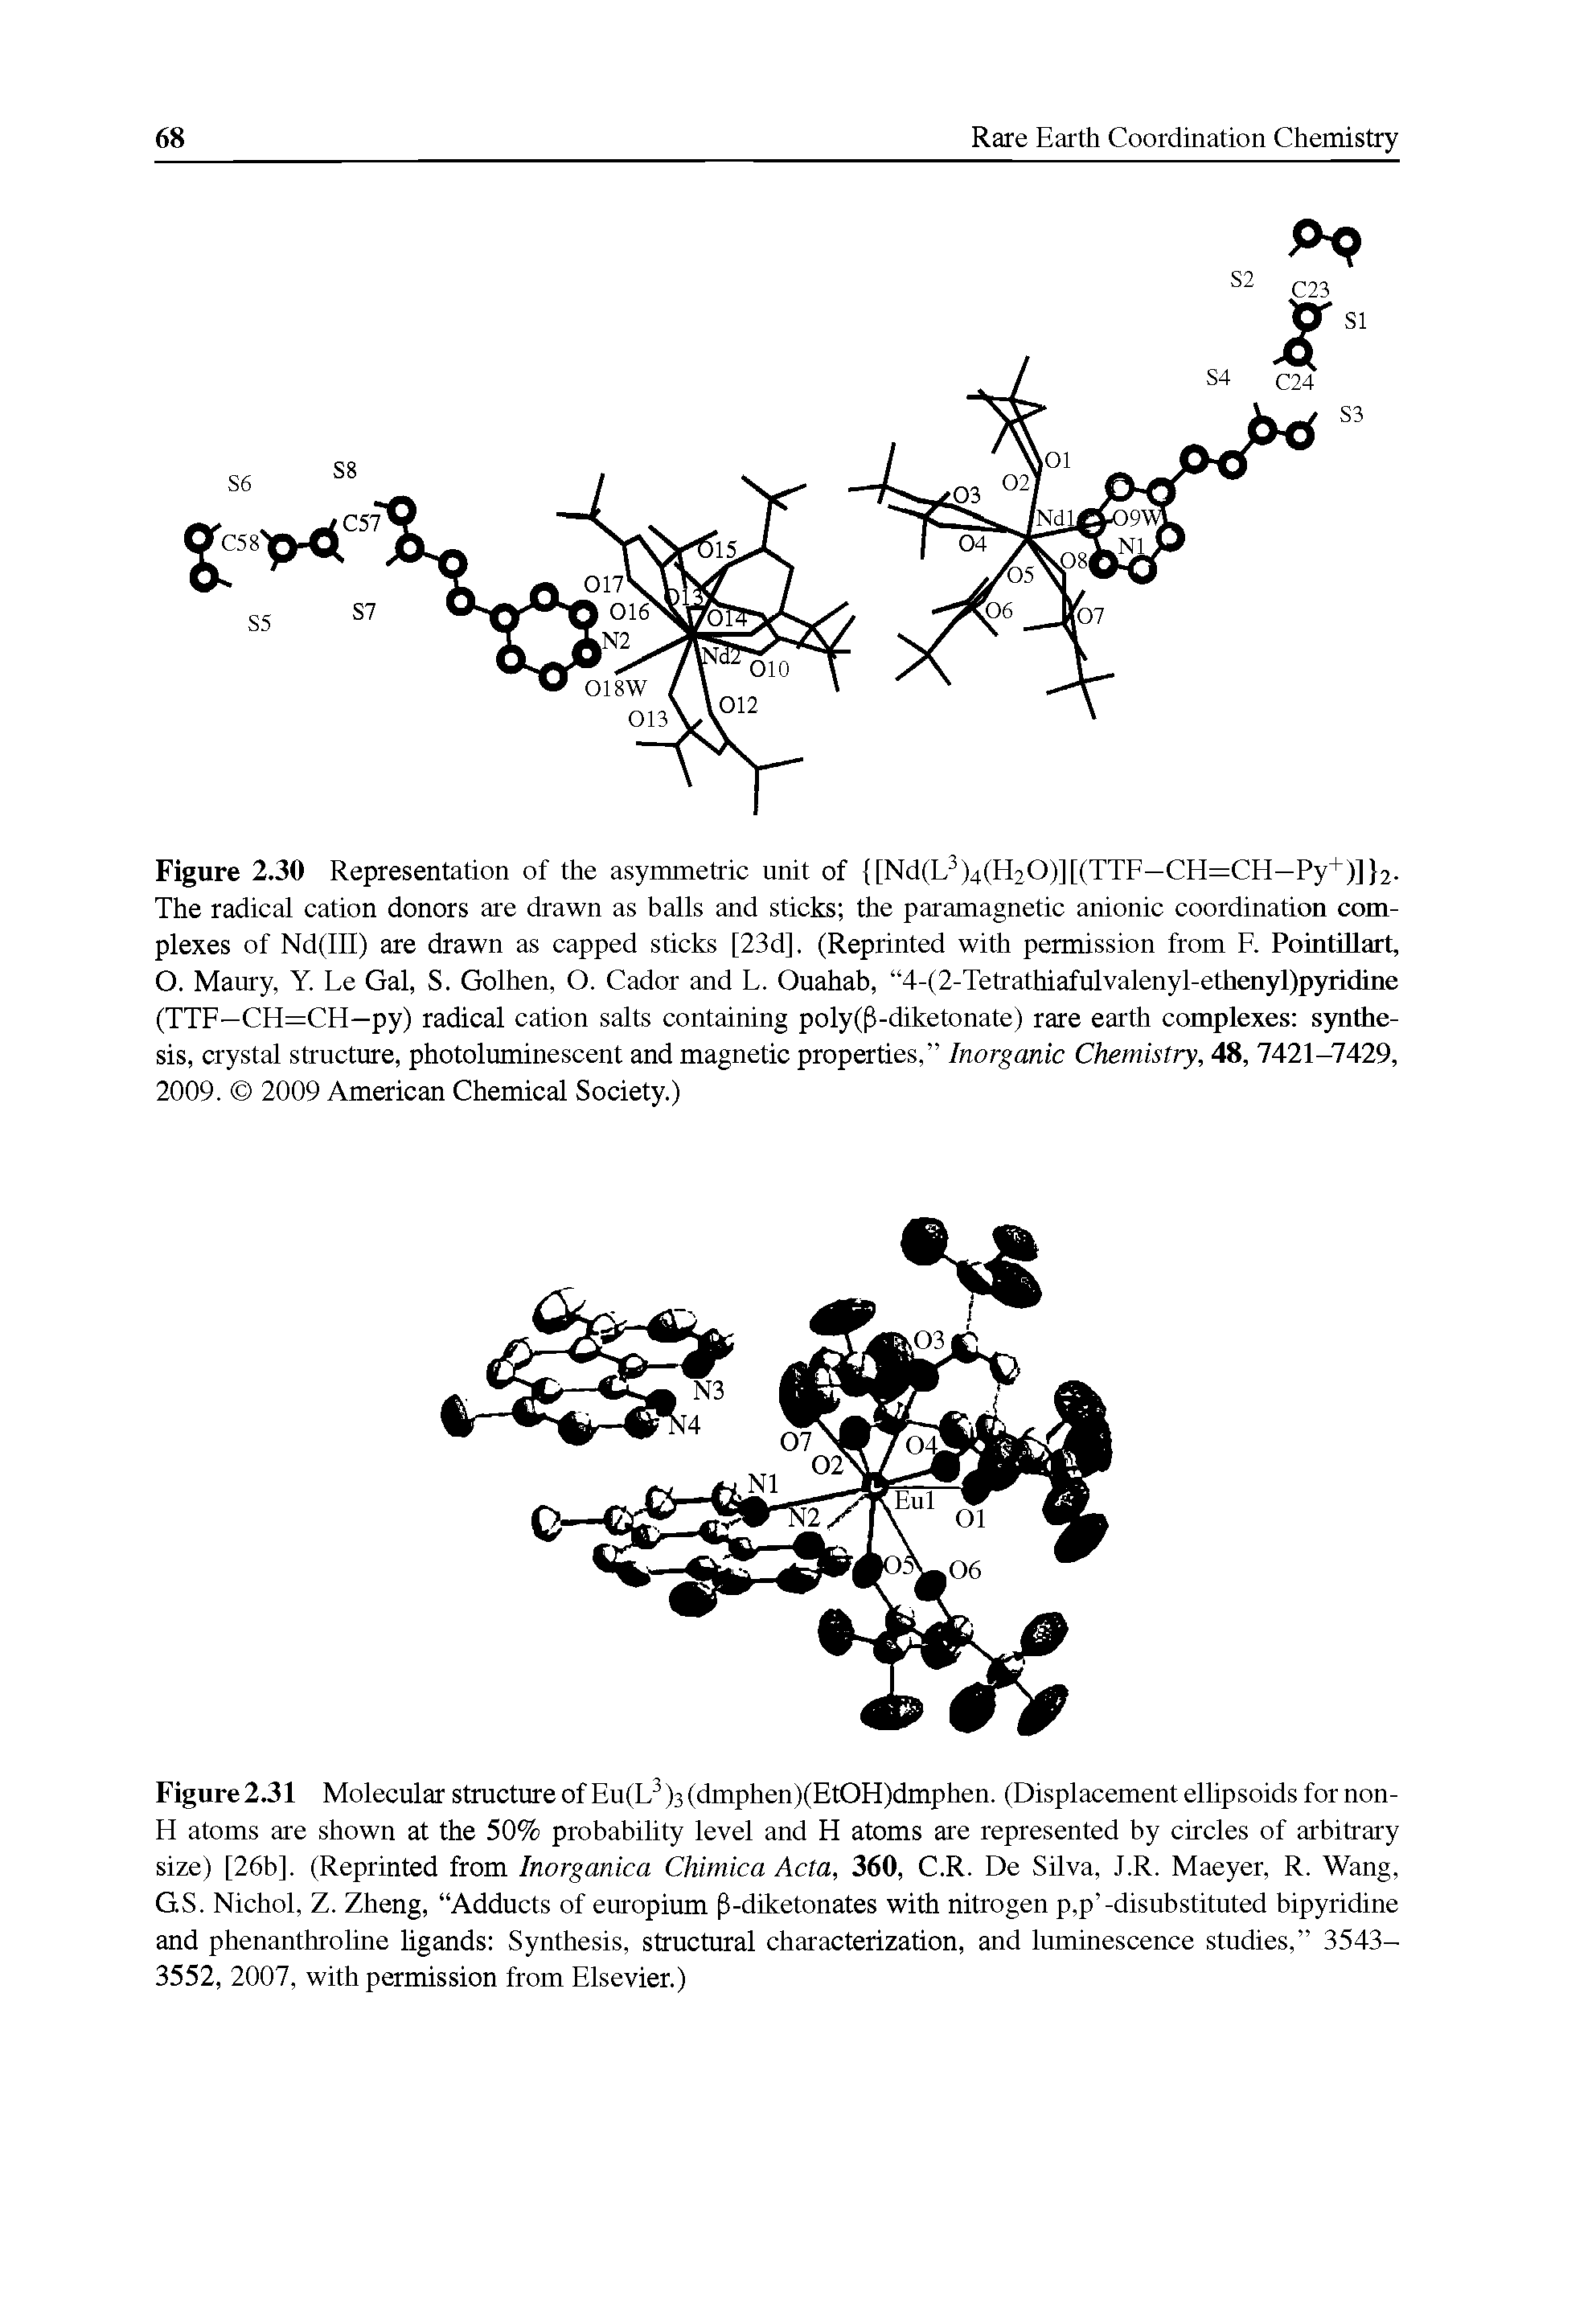 Figure 2.30 Representation of the asymmetric unit of [Nd(L )4(H20)][(TTF—CH=CH—Py+)] 2-The radical cation donors are drawn as balls and sticks the paramagnetic anionic coordination complexes of Nd(III) are drawn as capped sticks [23d], (Reprinted with permission from F. Pointillart, O. Maury, Y. Fe Gal, S. Golhen, O. Cador and F. Ouahab, 4-(2-Tetrathiafulvalenyl-ethenyl)pyridine (TTF—CH=CH—py) radical cation salts containing poly(P-diketonate) rare earth complexes synthesis, crystal structure, photoluminescent and magnetic properties, Inorganic Chemistry, 48, 7421-7429, 2009. 2009 American Chemical Society.)...